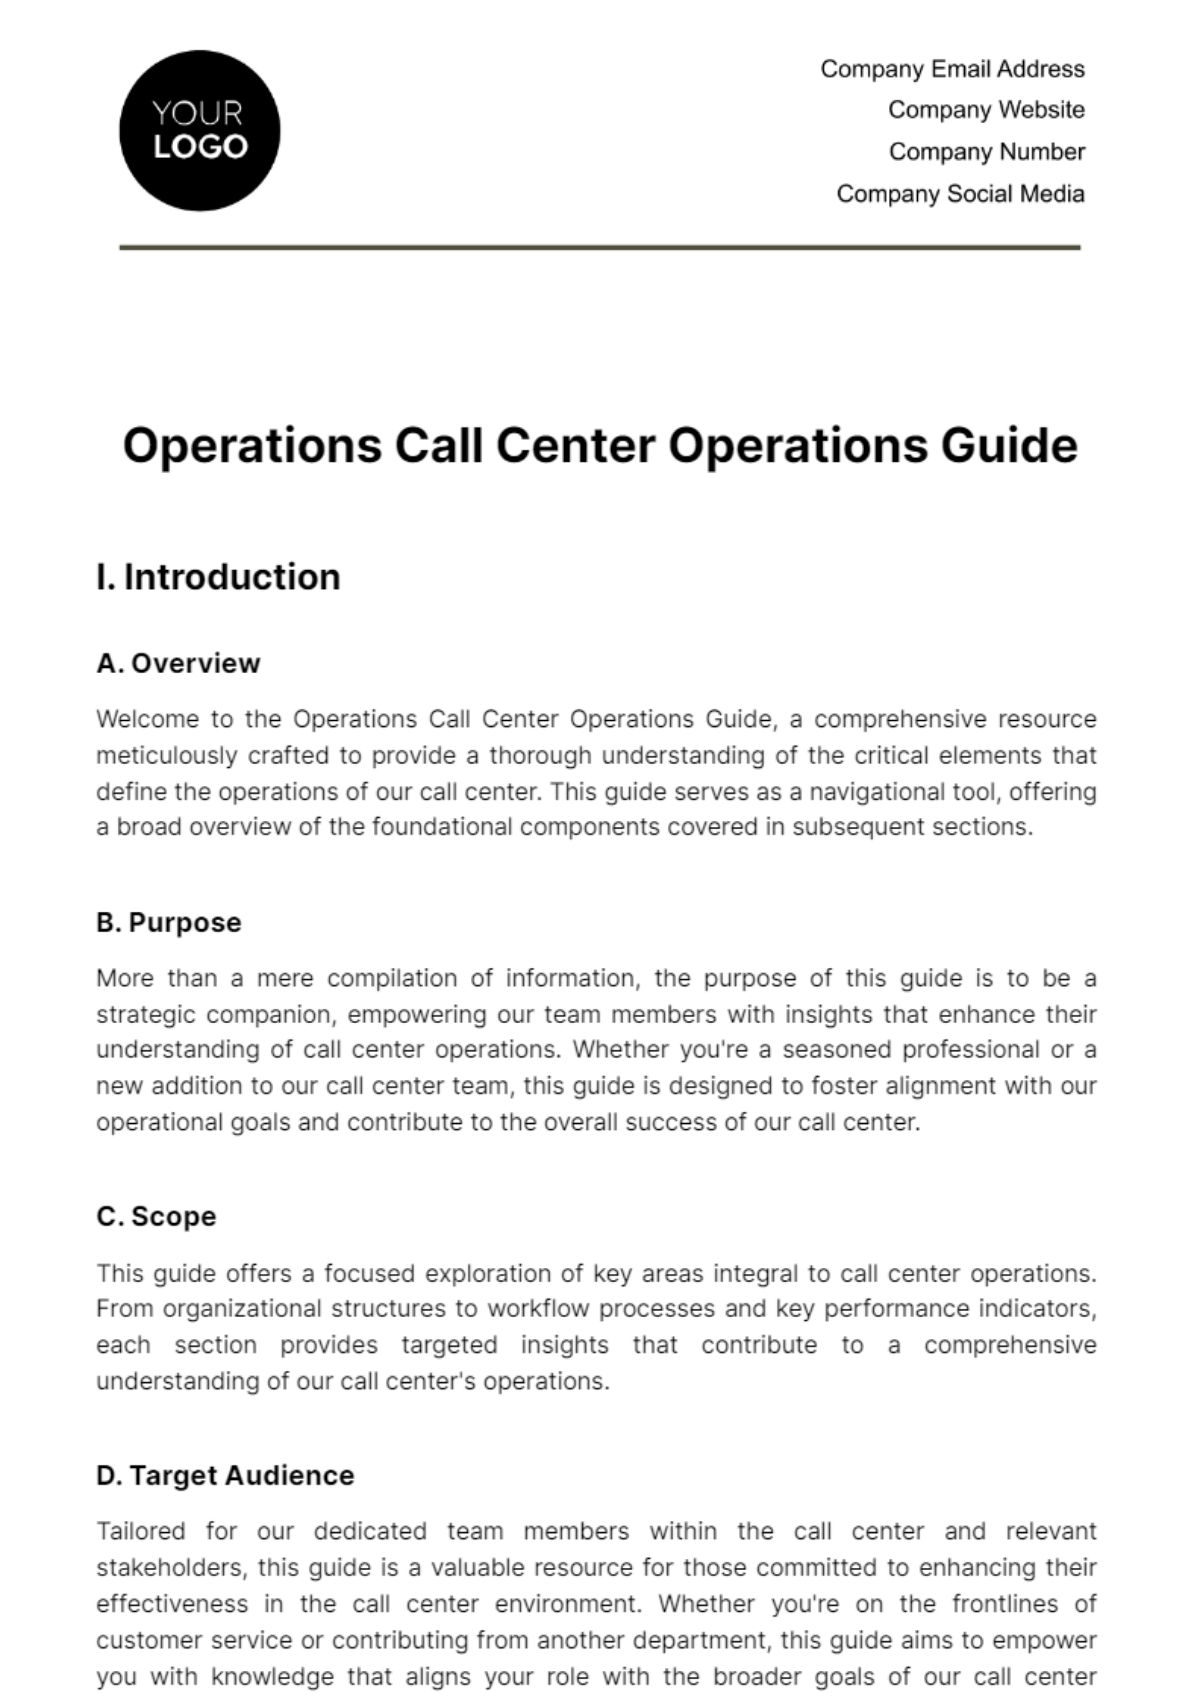 Operations Call Center Operations Guide Template